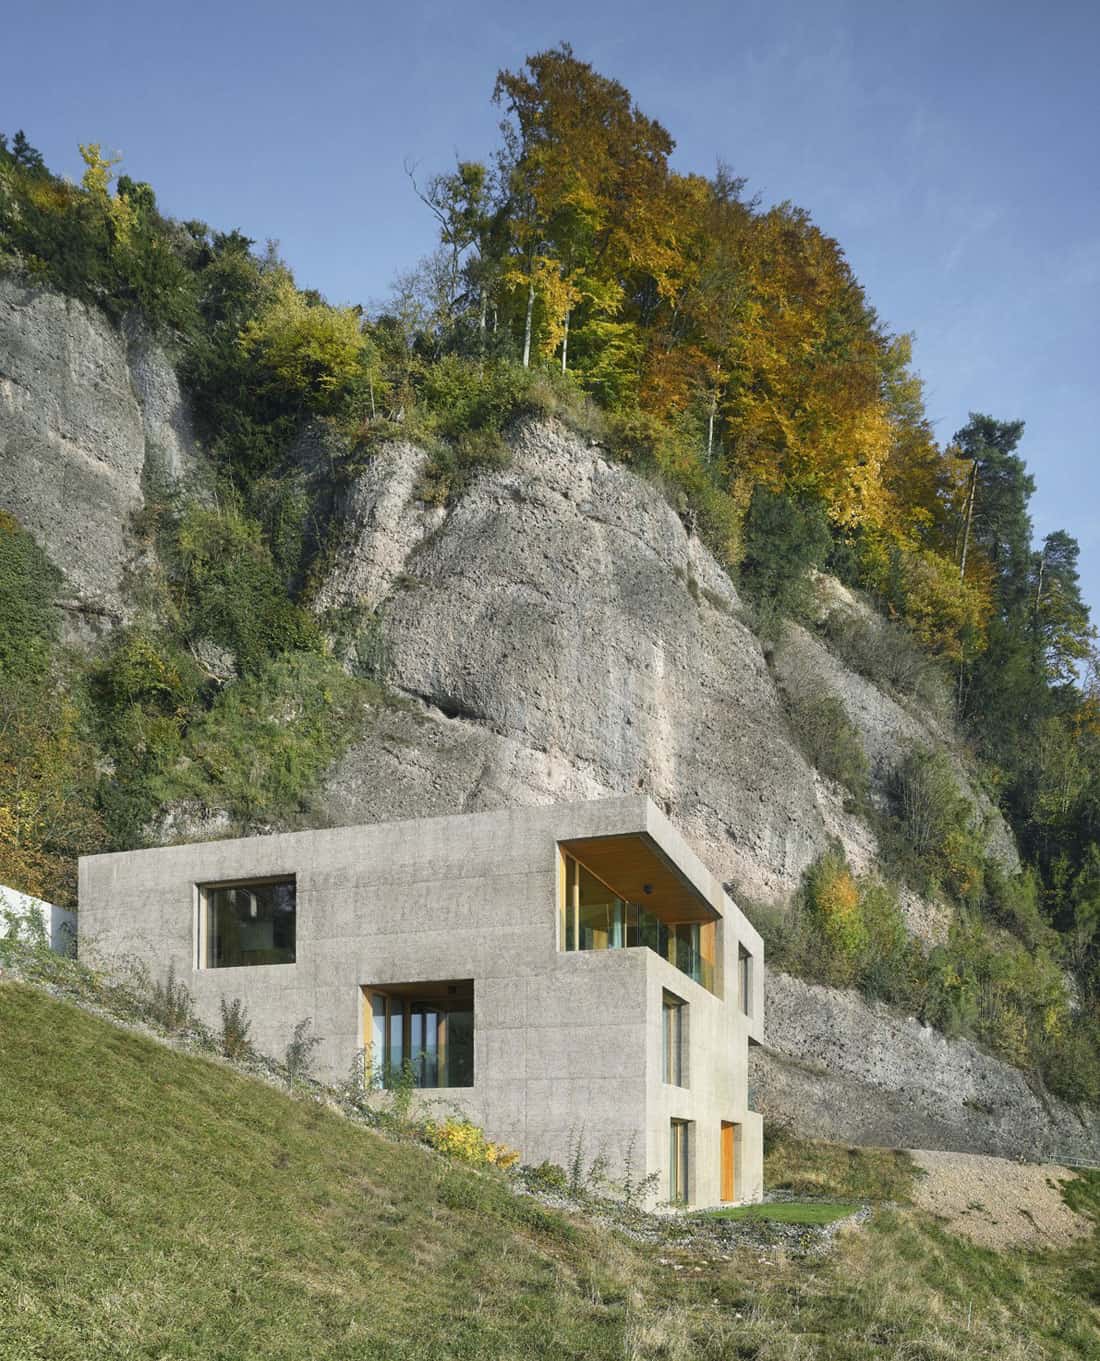 Hillside Home Is Wood Frame Construction With Concrete Facade